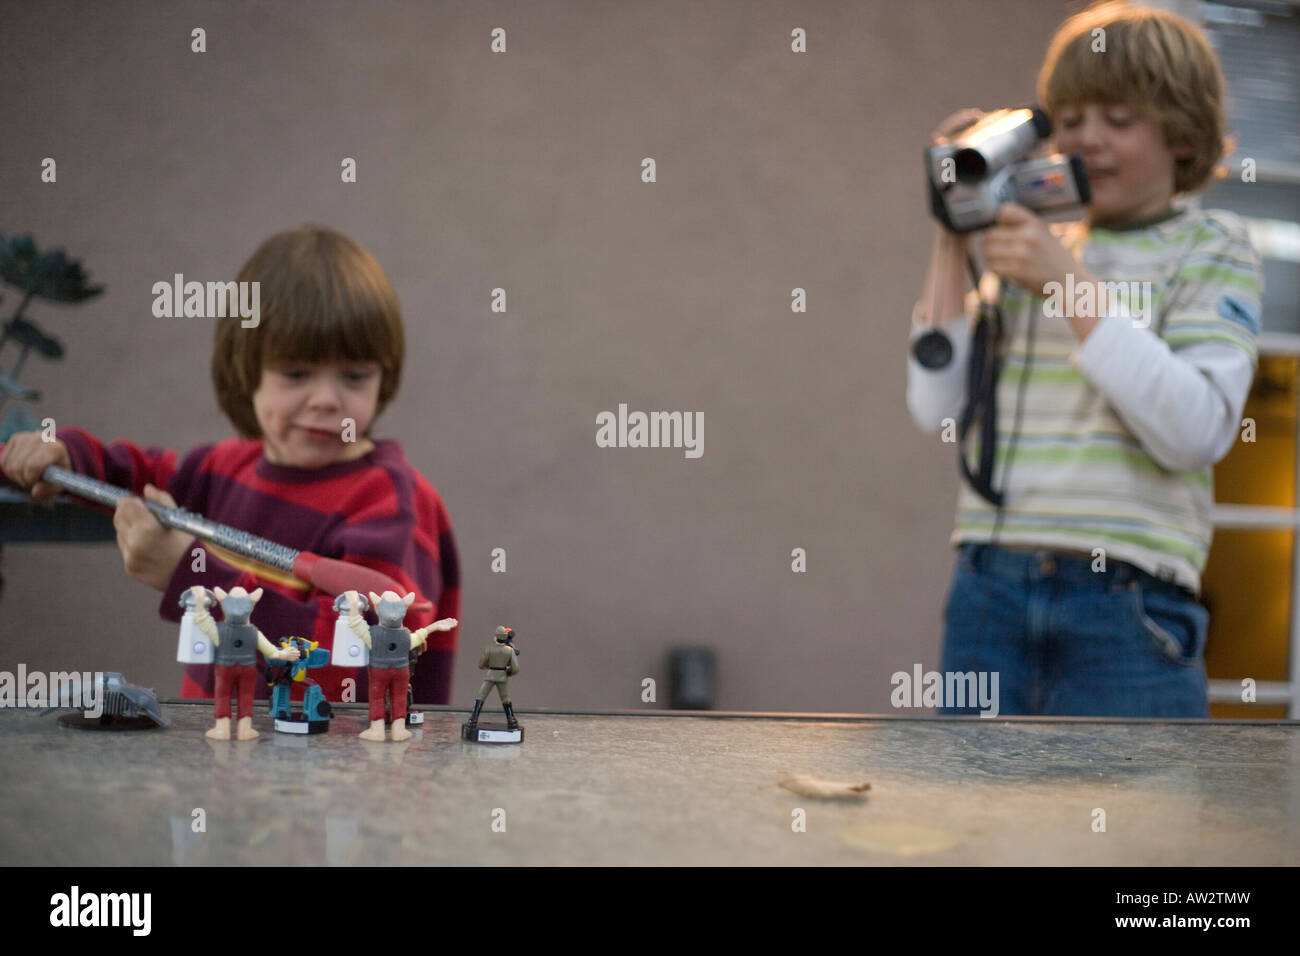 two boys making home movie together Stock Photo